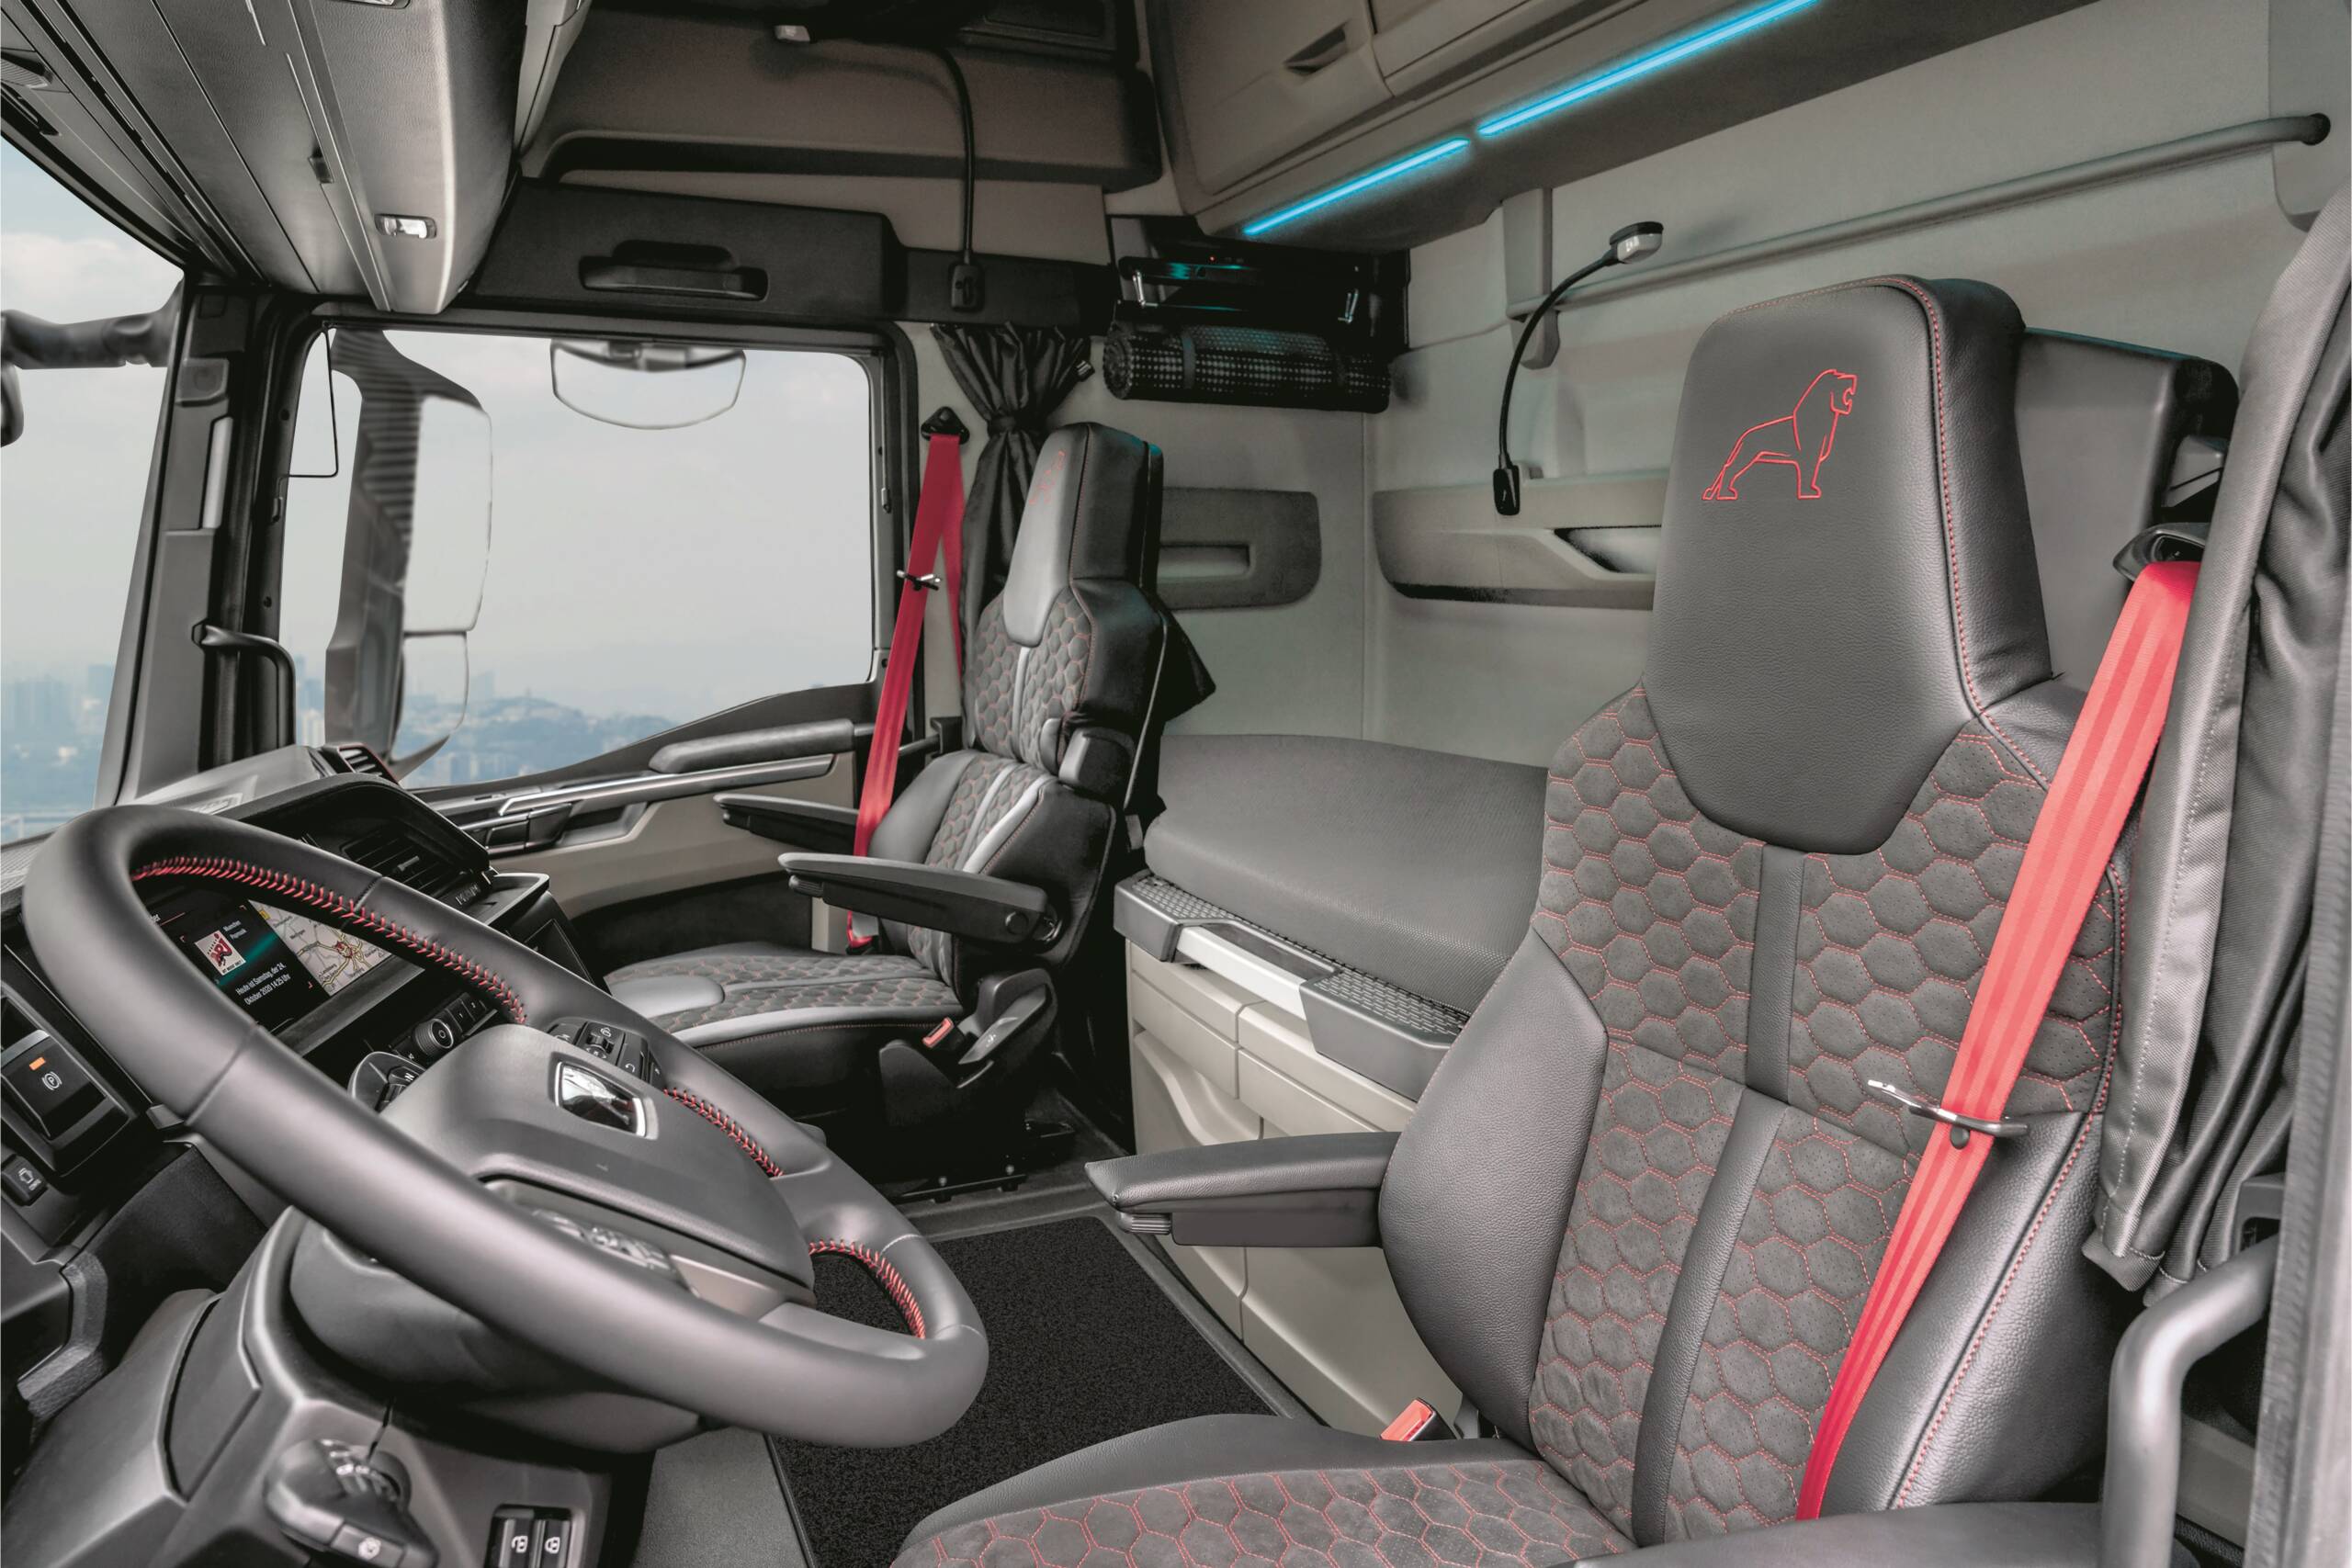 "We are very pleased with the first place for our MAN TGX Individual Lion S in the driver cab comparison test conducted by the trade magazine FERNFAHRER," says Friedrich Baumann, Member of the Executive Board for Sales & Customer Solutions at MAN Truck & Bus SE. "Our focus is consistently on ensuring that drivers feel comfortable in their job, which is so important for all of us. That's why we asked for their practical expertise when developing our new truck generation and have consistently incorporated it."  The trade magazine FERNFAHRER tested four long-distance vehicles in terms of cabin comfort and driver friendliness. They judged the largest long-distance cab from MAN as well as the three market competitors DAF, Mercedes and Scania in the top equipment. MAN sent its top model, the MAN TGX-18.640 (640 hp) Individual Lion S, into the race. The test results were published in FERNFAHRER 10/2022: MAN took first place with 460.5 out of 500 maximum points, which were awarded in various criteria.  "True size is not only measured in the number of centimetres from the front to the rear or the interior volume of the cab," the testers write in their verdict. "Quality of operation and coherence of the interior design, driving comfort as well as the long bar of today's safety and assistance systems: All this adds up to a comprehensive truck interior in which everything should mesh as well as possible."  And here the MAN TGX Individual Lion S with its wide and high GX cab was the most convincing. The jury praised the attractiveness of the new MAN truck generation. The top equipment of the test model was particularly appealing: "A feast for the eyes inside and out". Among other things, the easy entry and the interior with various storage compartments were highlighted. The centre square and the space above it were considered spacious. The rear wall module impressed with its capacity of around 470 litres and its permanently installed set of microwave and coffee maker. The testers also praised the two available 230 V sockets. In their assessment, the testers also highlighted the control module in the sleeping area, which, in addition to the usual comfort applications, also allows the control of on-board computer functions from the couch. The extra bar for the four switches in the lower area of the driver's door and the steering wheel, which can be raised completely horizontally when the MAN TGX is parked, also attracted positive attention. The intuitive operation of digital and analogue functions was also praised by the testers.  In the overall ranking, the MAN TGX Individual Lion S is thus ahead in the test of the very large cabs. The conclusion of the specialist editors: "With the TGX, MAN shows that a careful, clever fusion of tradition and modernity can develop a very special charm.